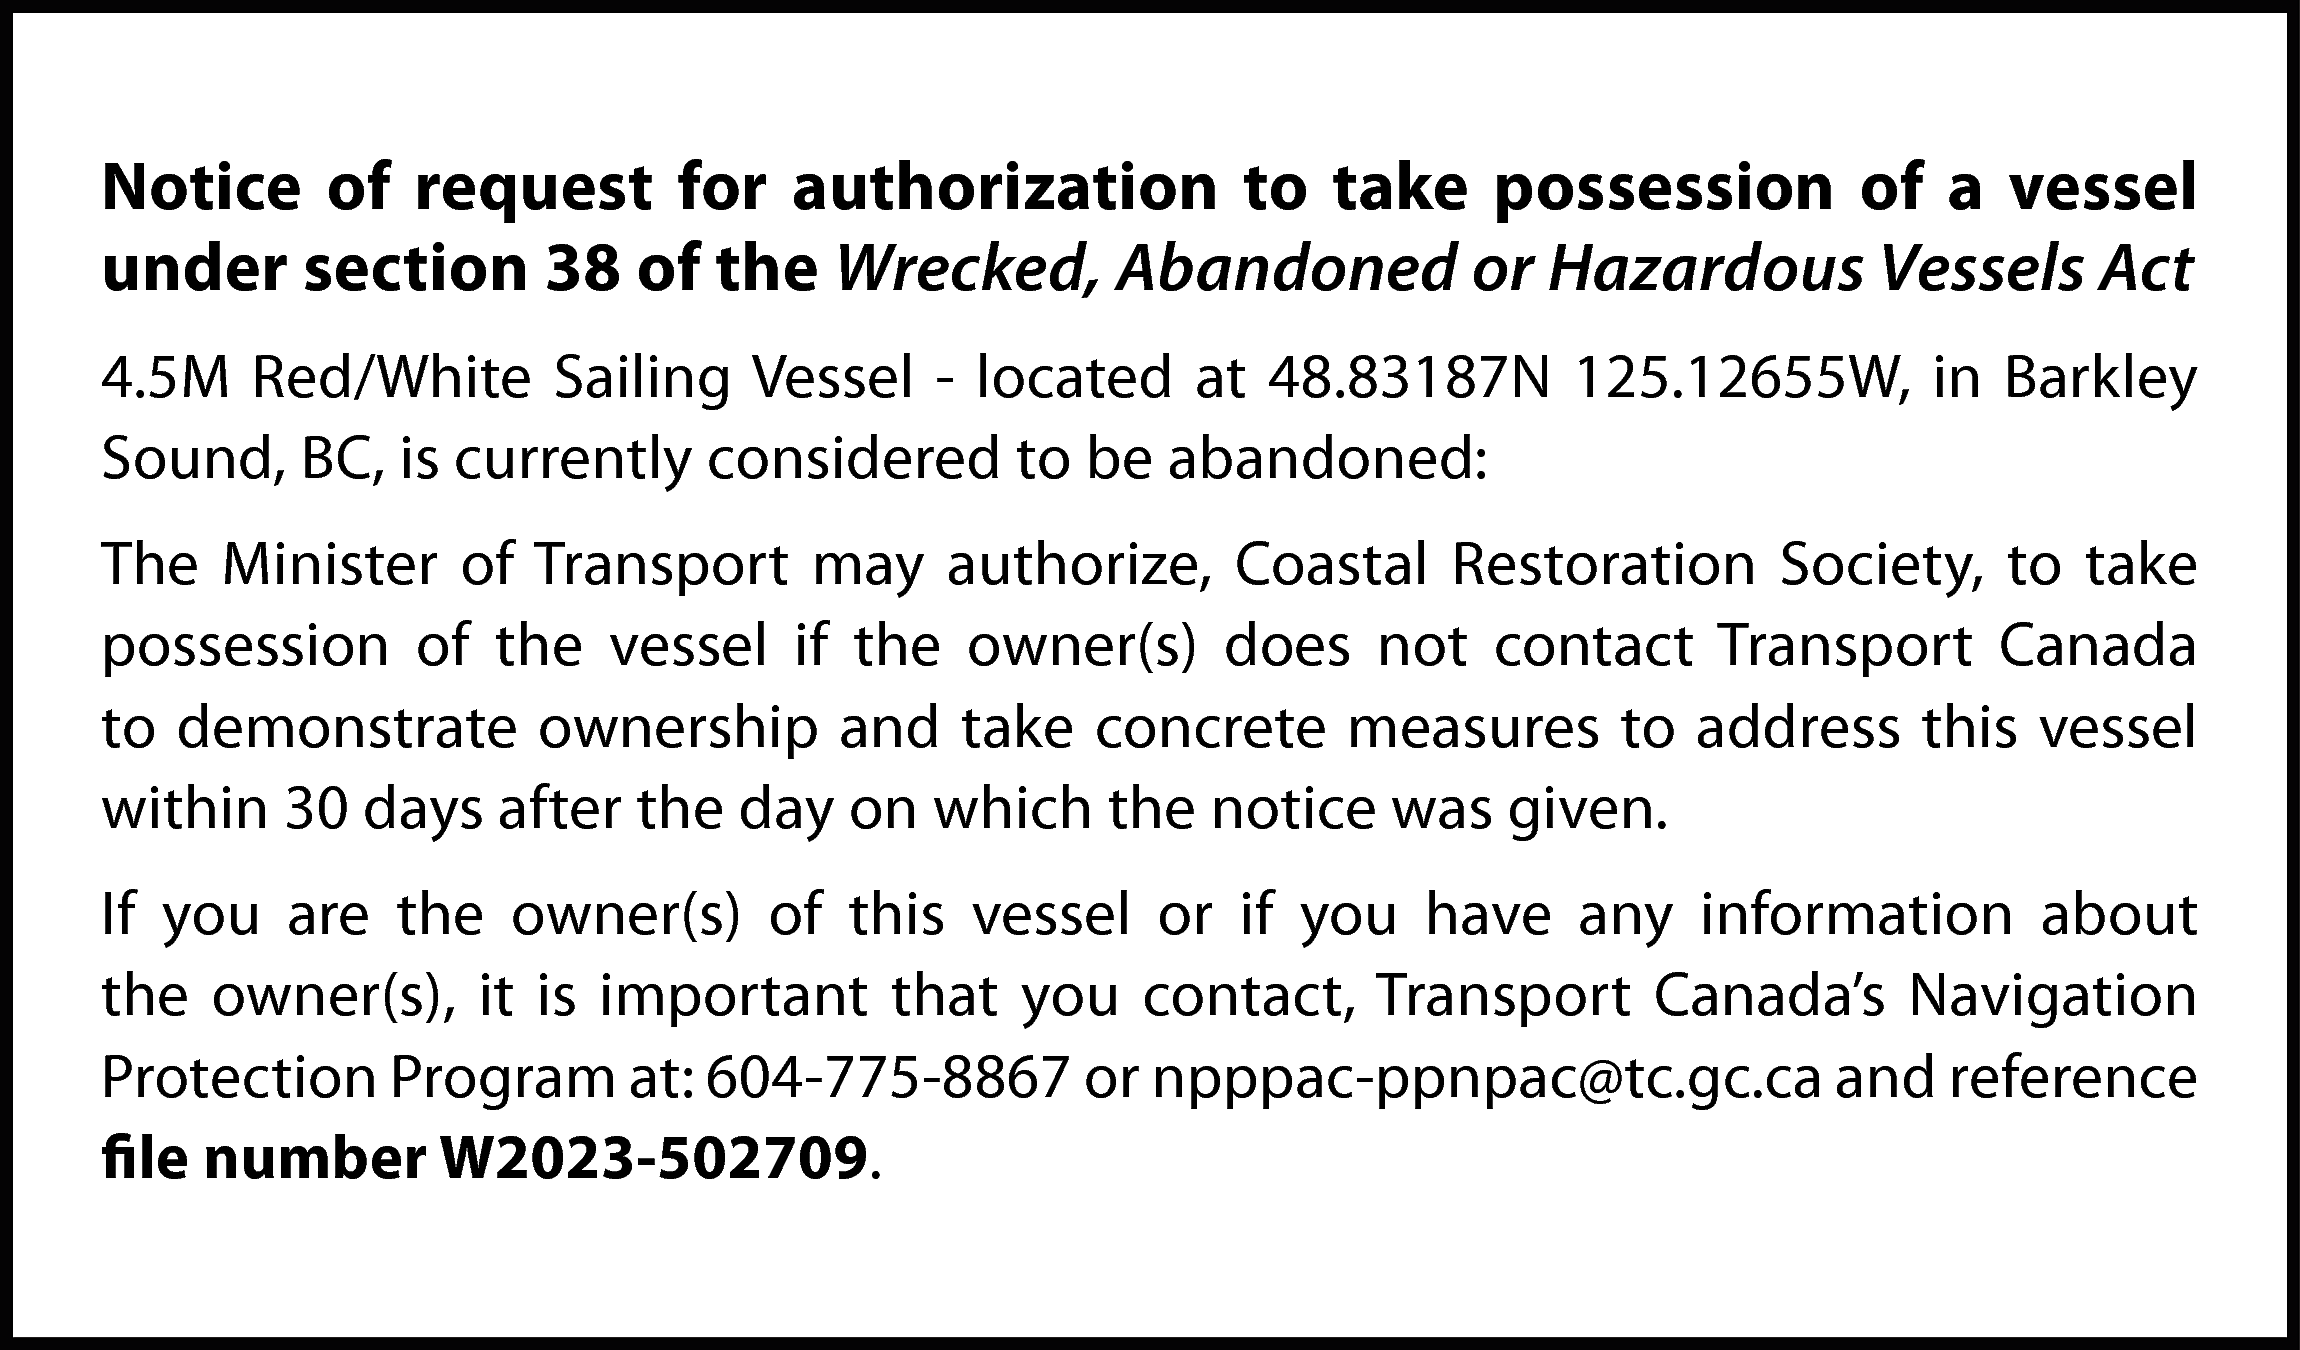 Notice of request for authorization  Notice of request for authorization to take possession of a vessel  under section 38 of the Wrecked, Abandoned or Hazardous Vessels Act  4.5M Red/White Sailing Vessel - located at 48.83187N 125.12655W, in Barkley  Sound, BC, is currently considered to be abandoned:  The Minister of Transport may authorize, Coastal Restoration Society, to take  possession of the vessel if the owner(s) does not contact Transport Canada  to demonstrate ownership and take concrete measures to address this vessel  within 30 days after the day on which the notice was given.  If you are the owner(s) of this vessel or if you have any information about  the owner(s), it is important that you contact, Transport Canada’s Navigation  Protection Program at: 604-775-8867 or npppac-ppnpac@tc.gc.ca and reference  file number W2023-502709.    